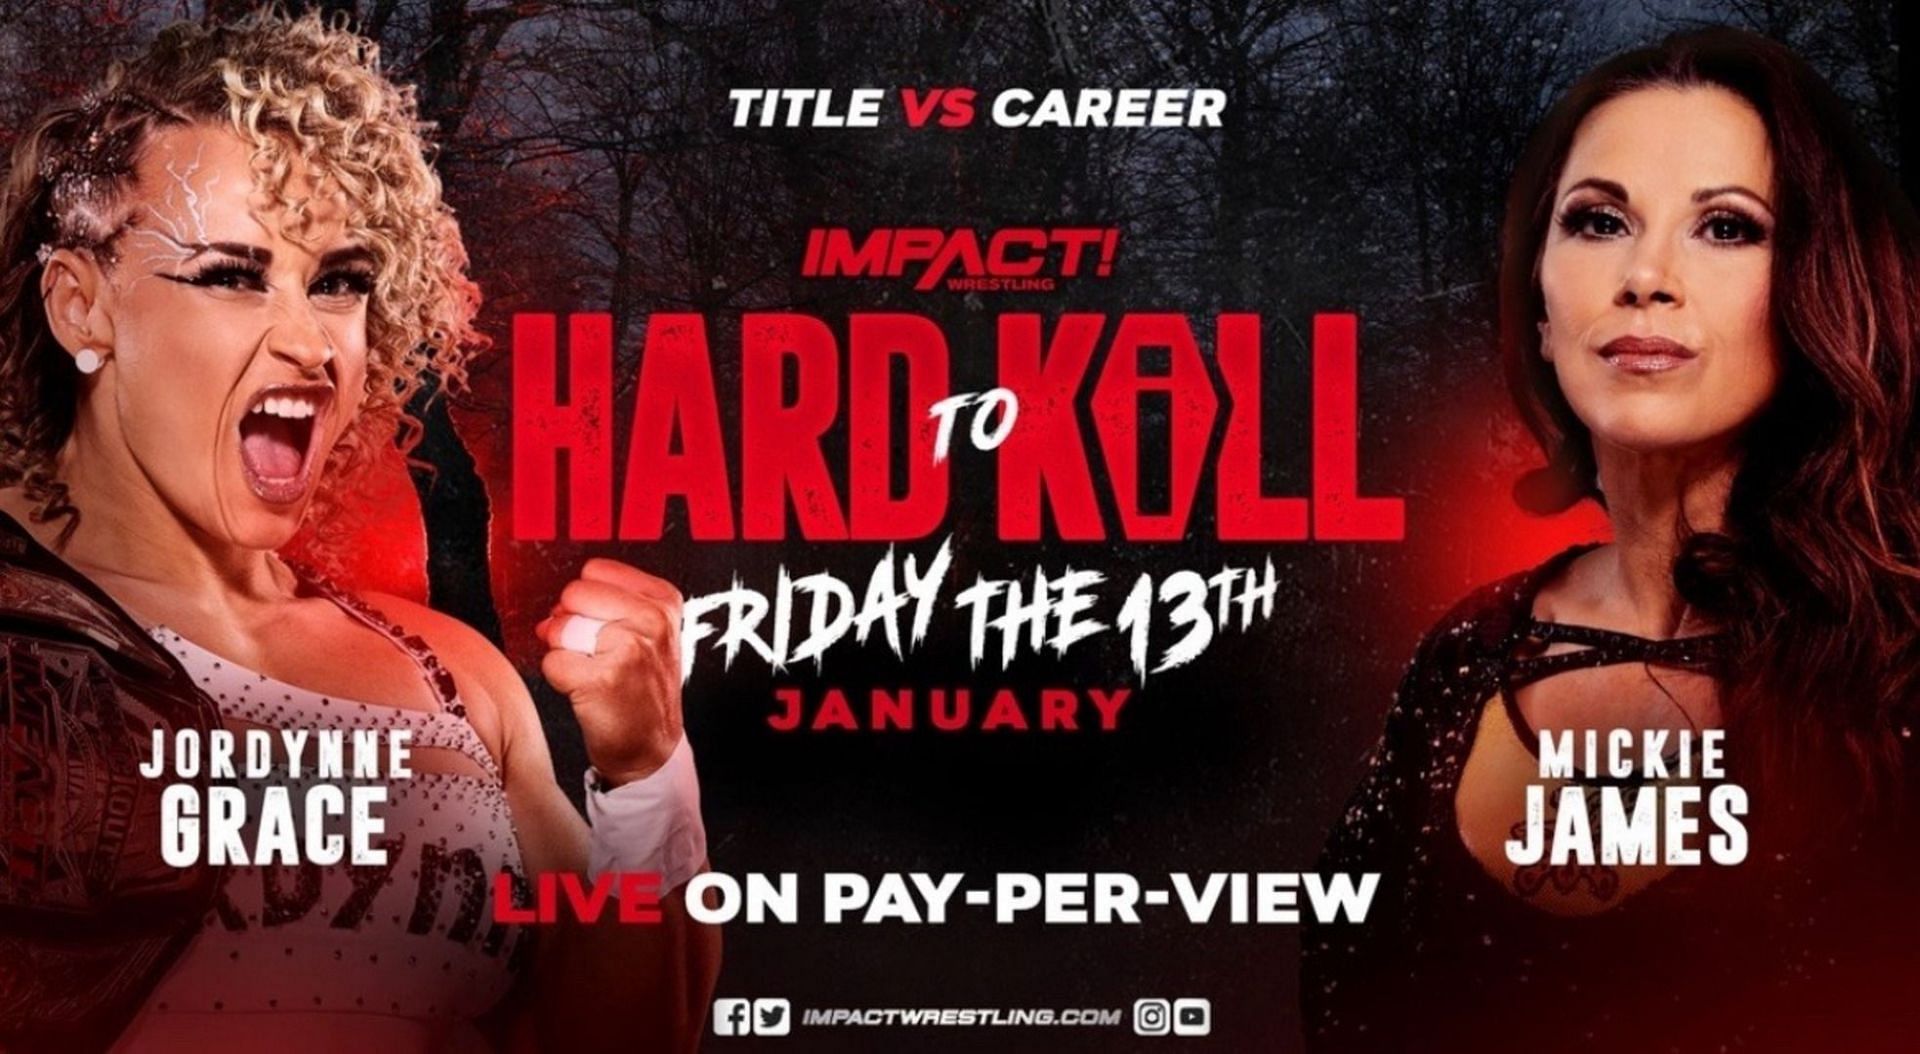 Mickie James competed in a Title vs Career match at IMPACT Wrestling Hard To Kill